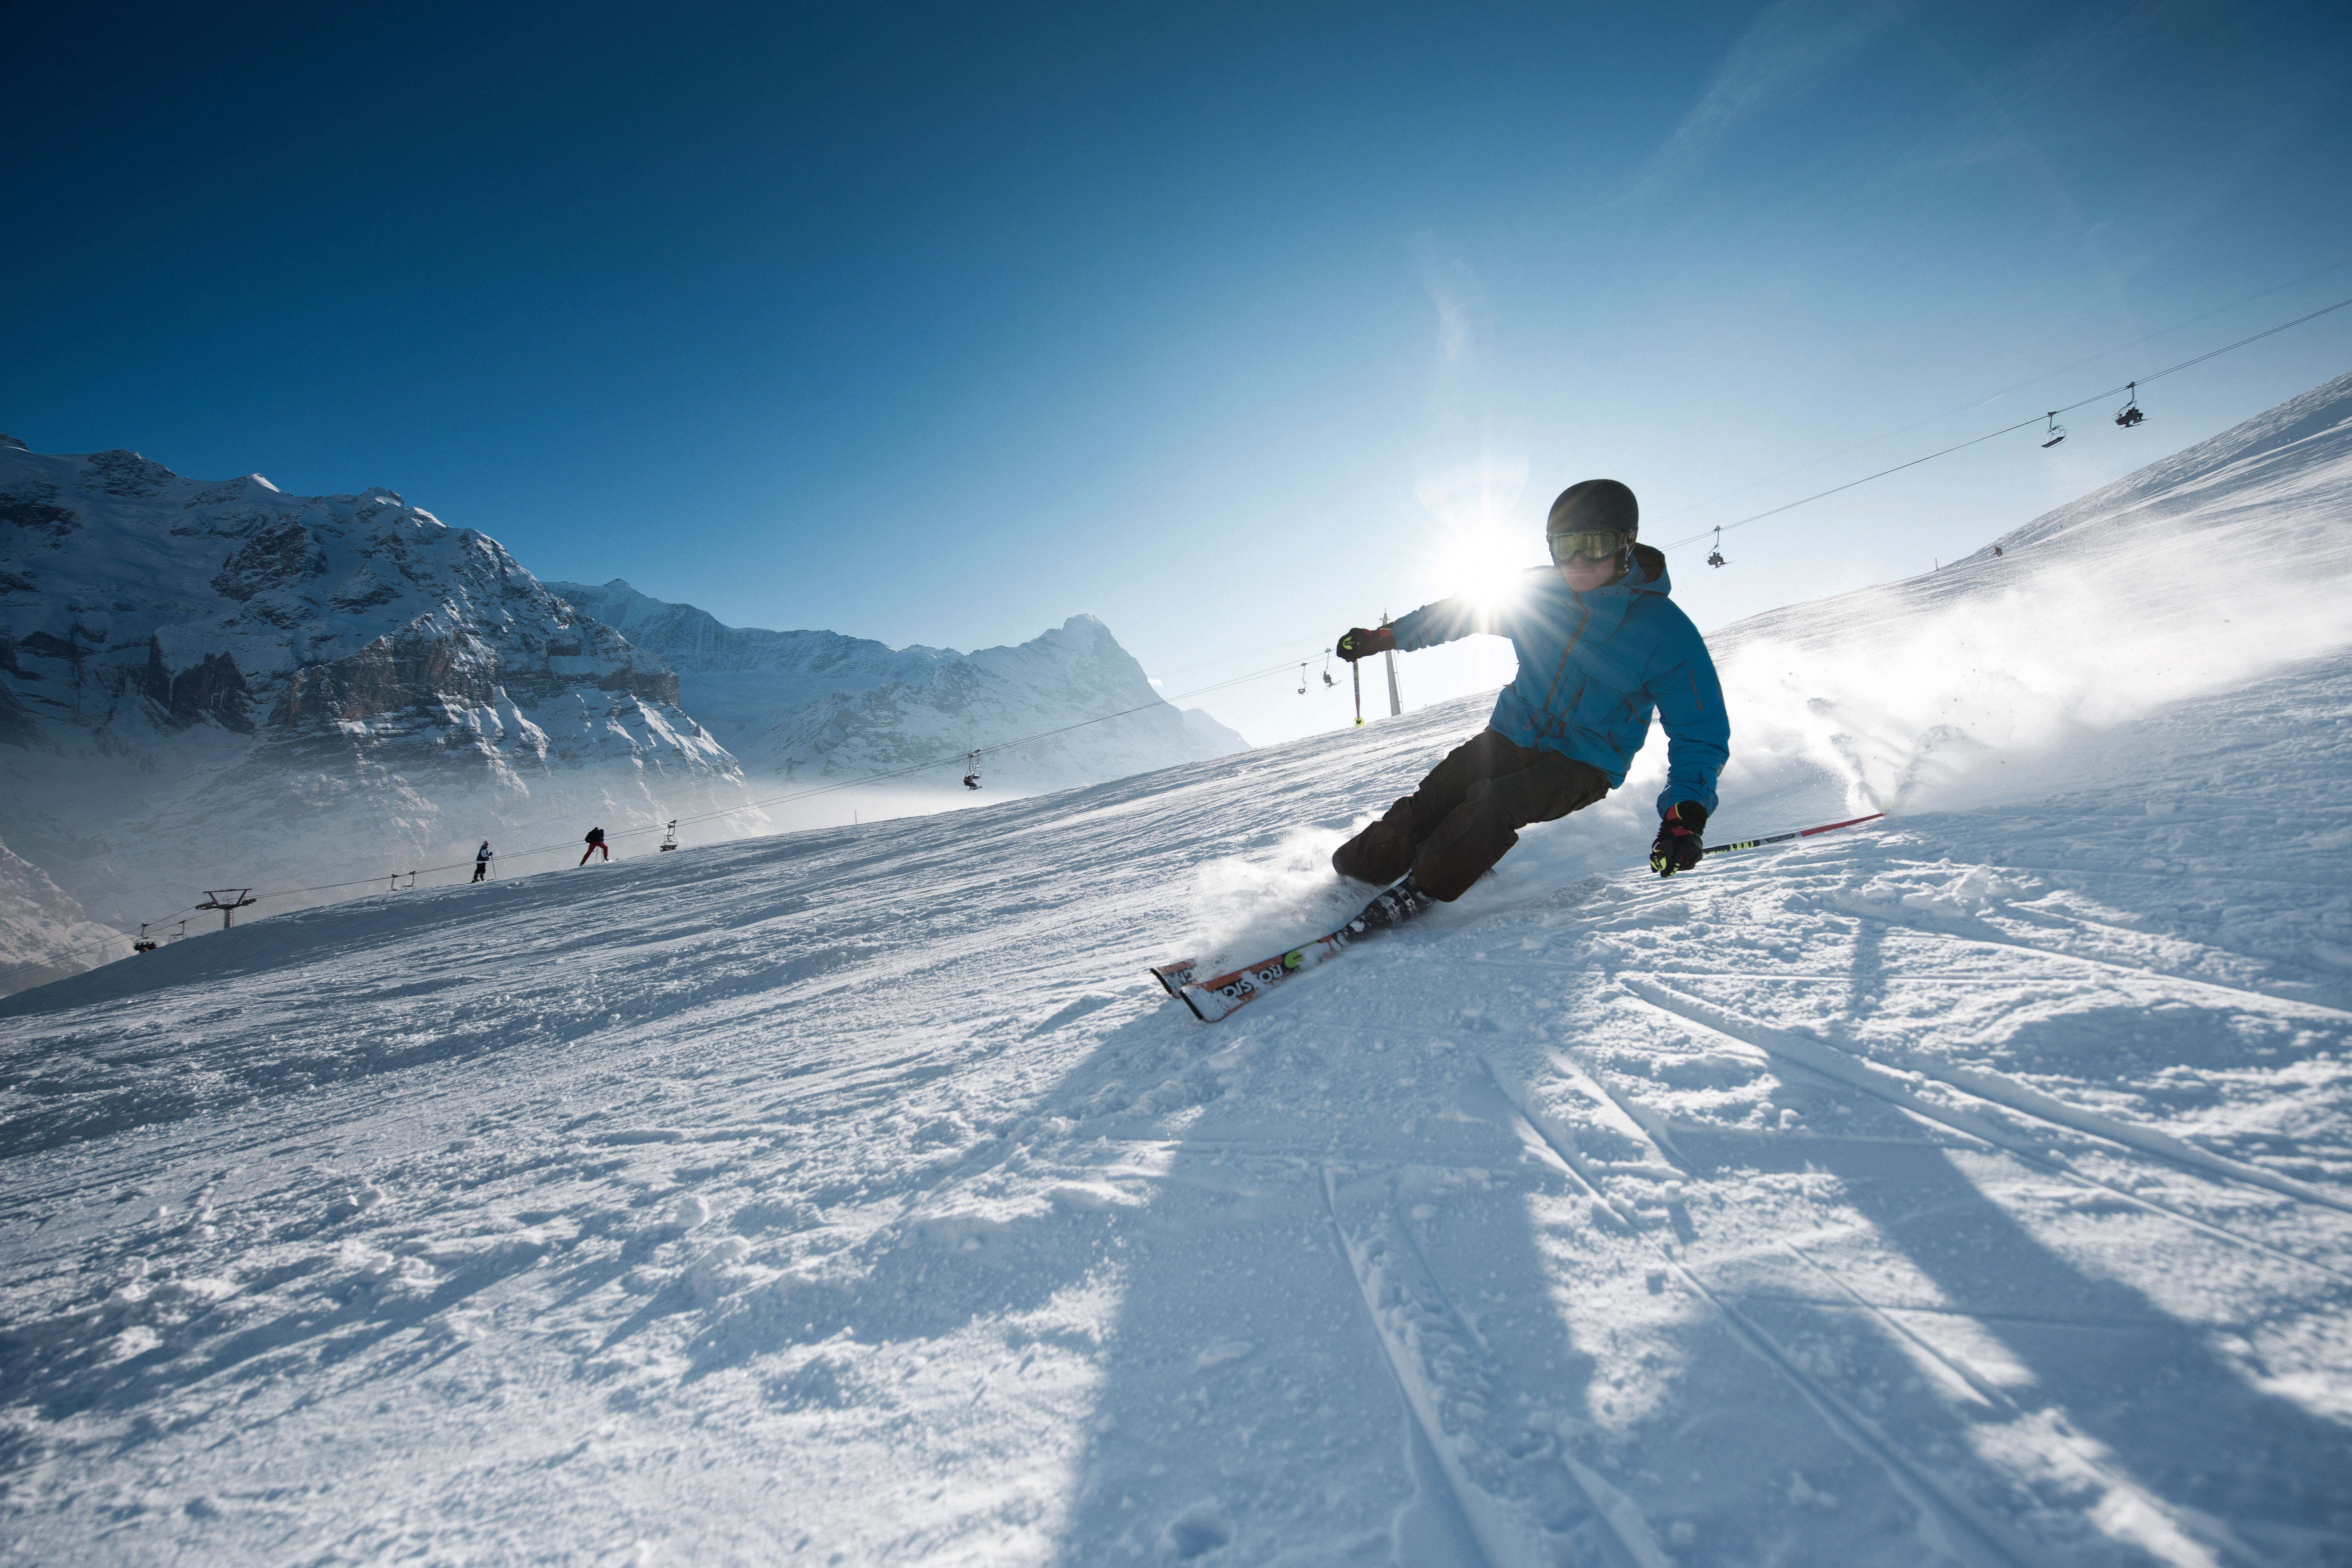 sunny-winter-day-perfect-for-skiing-winter-sports-6048x4032.jpg